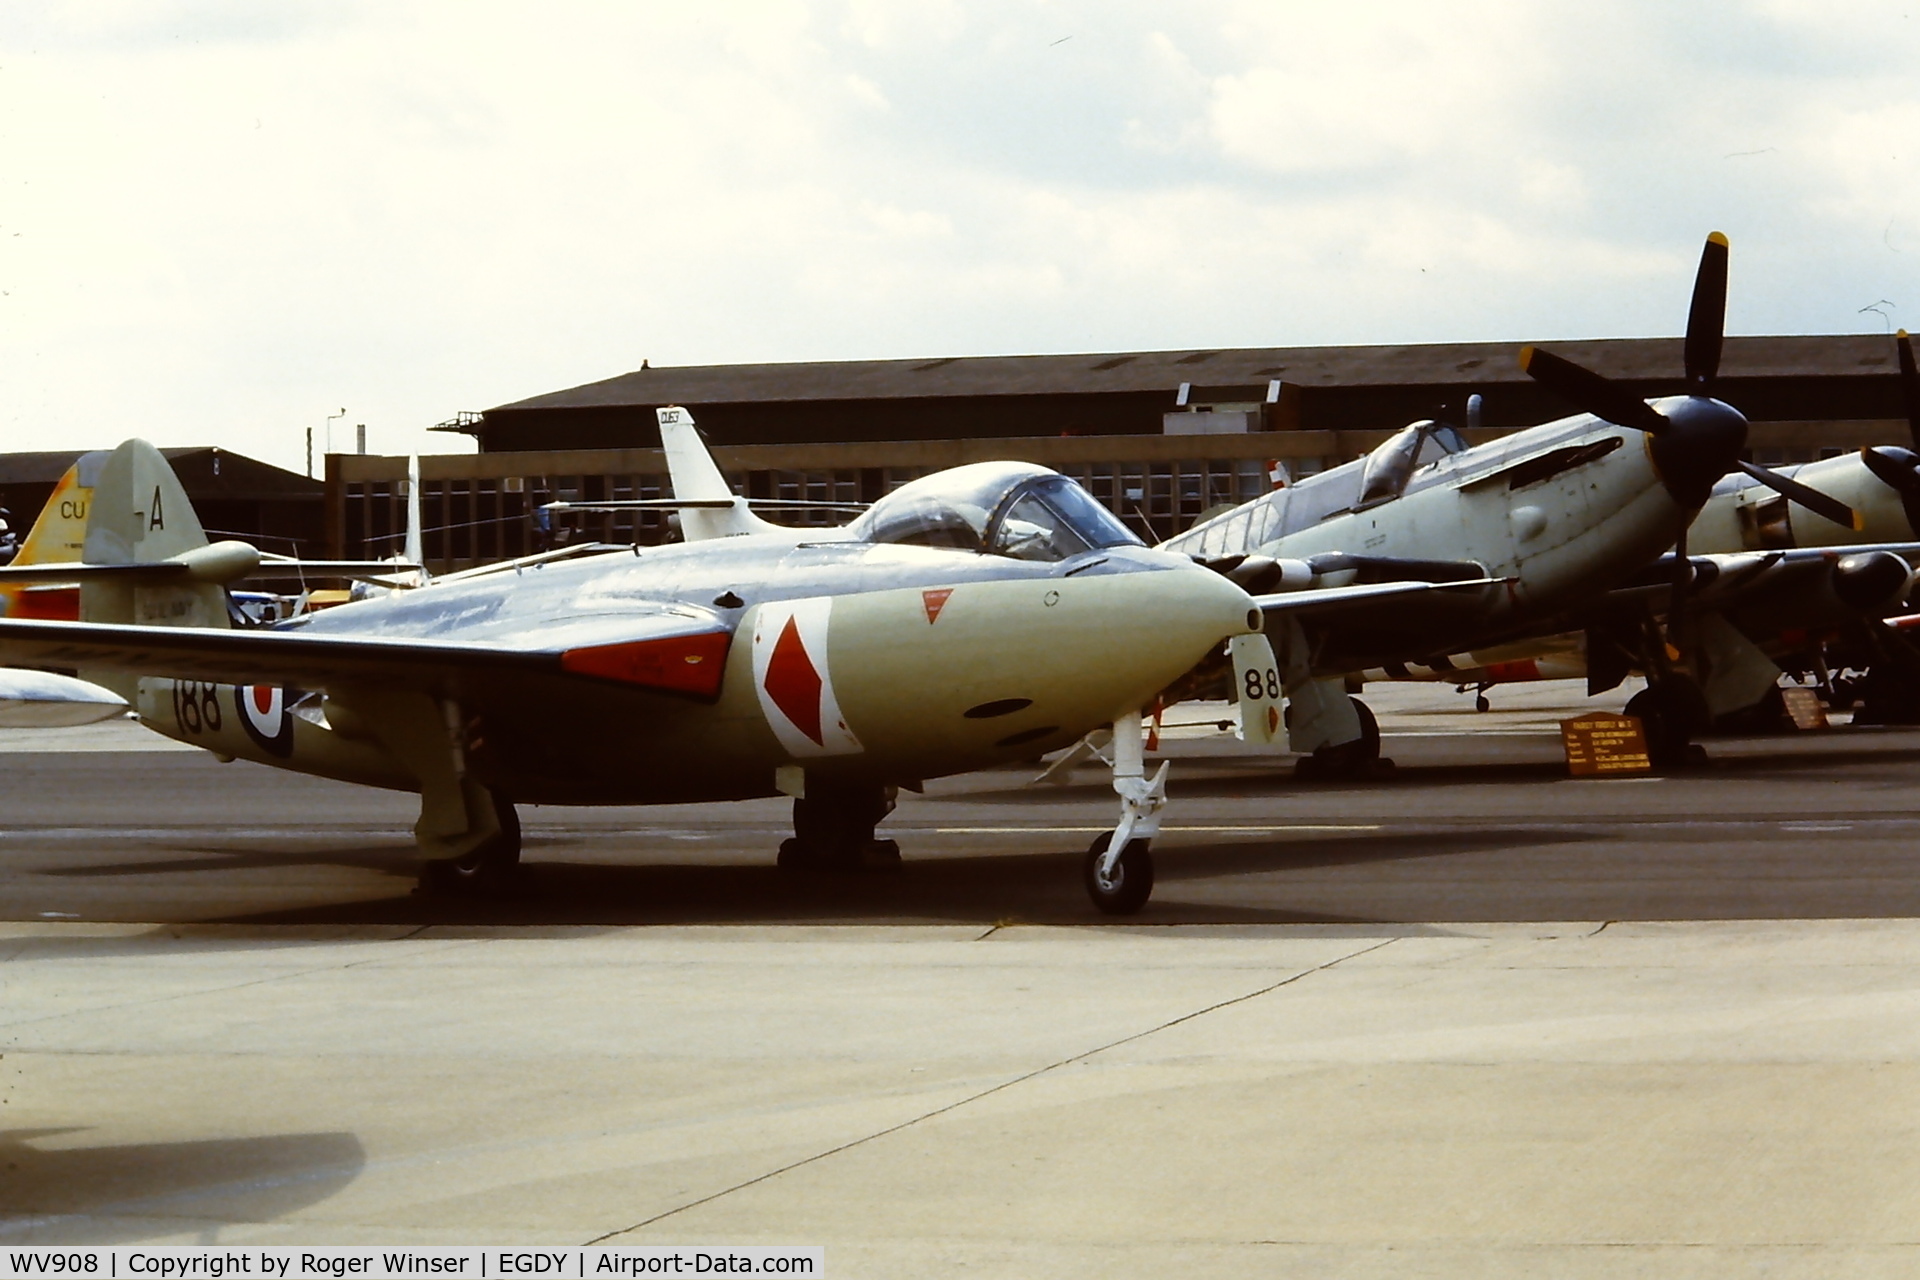 WV908, 1954 Hawker Sea Hawk FGA.6 C/N 6123, In 806 NAS markings, coded 188/A. Part of the RNHF based at RNAS Yeovilton. Photographed with the Fairey Firefly and Hawker Sea Fury in 1983?